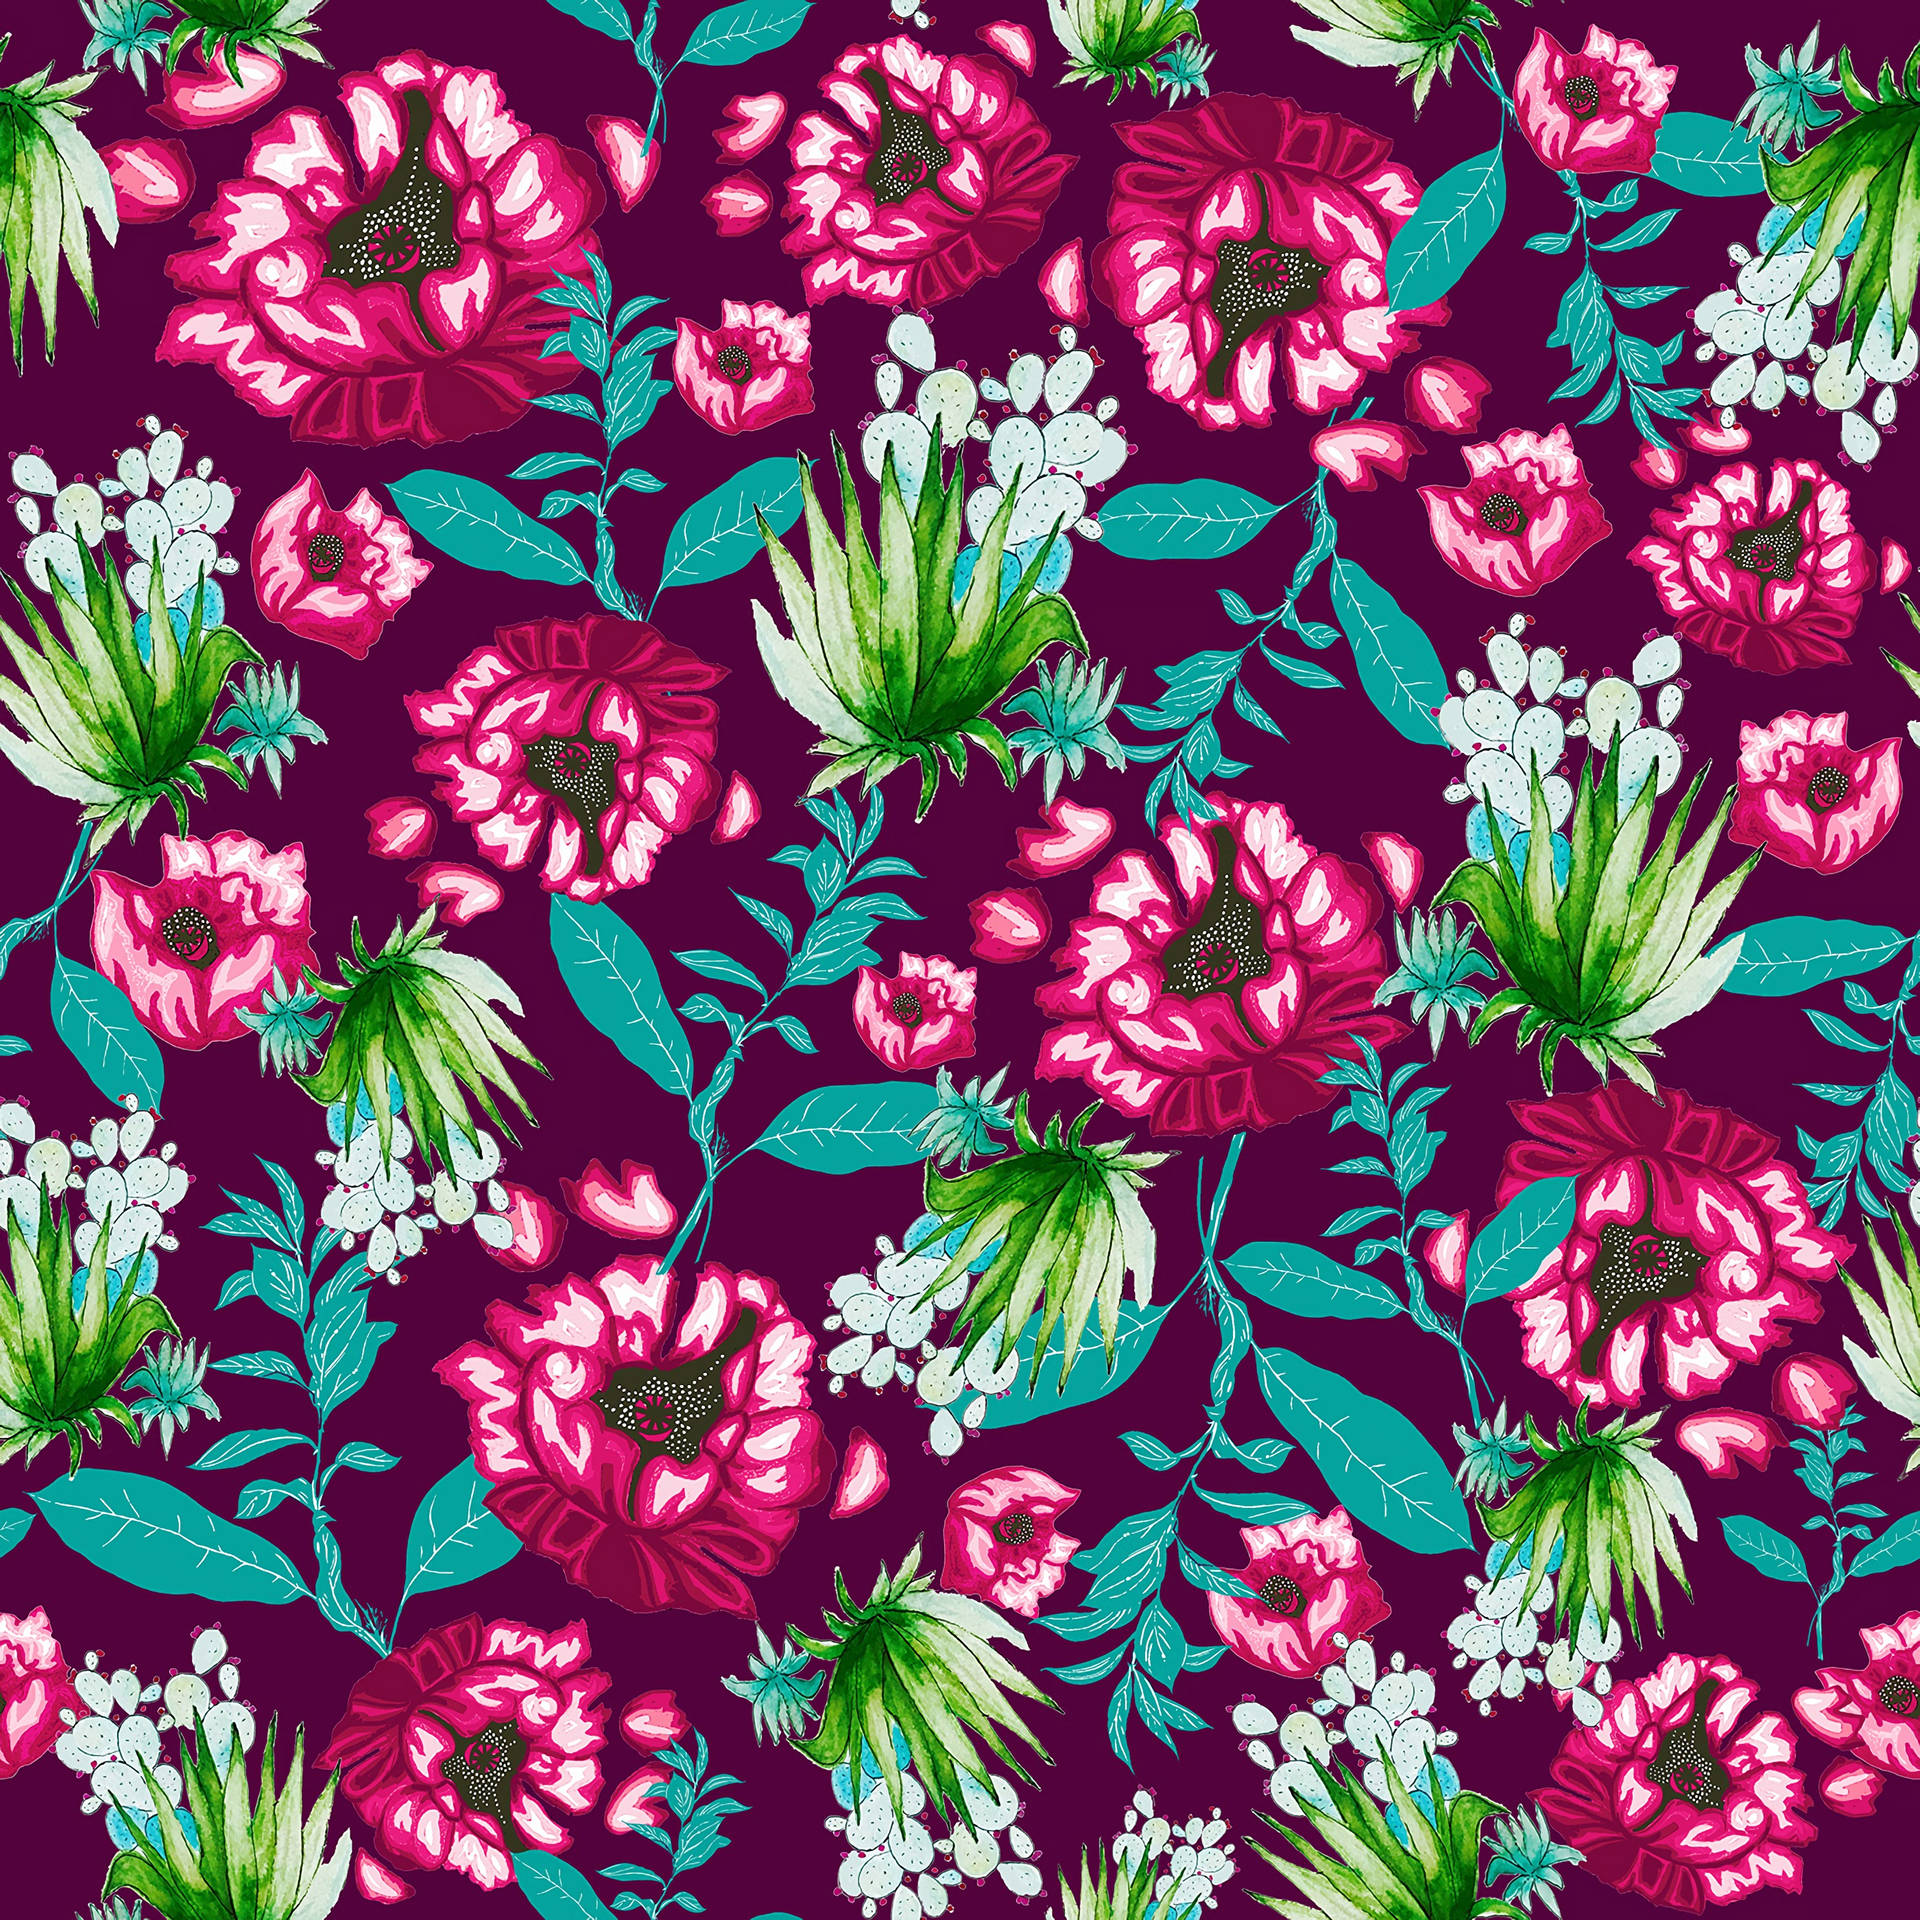 Floral 2800X2800 Wallpaper and Background Image